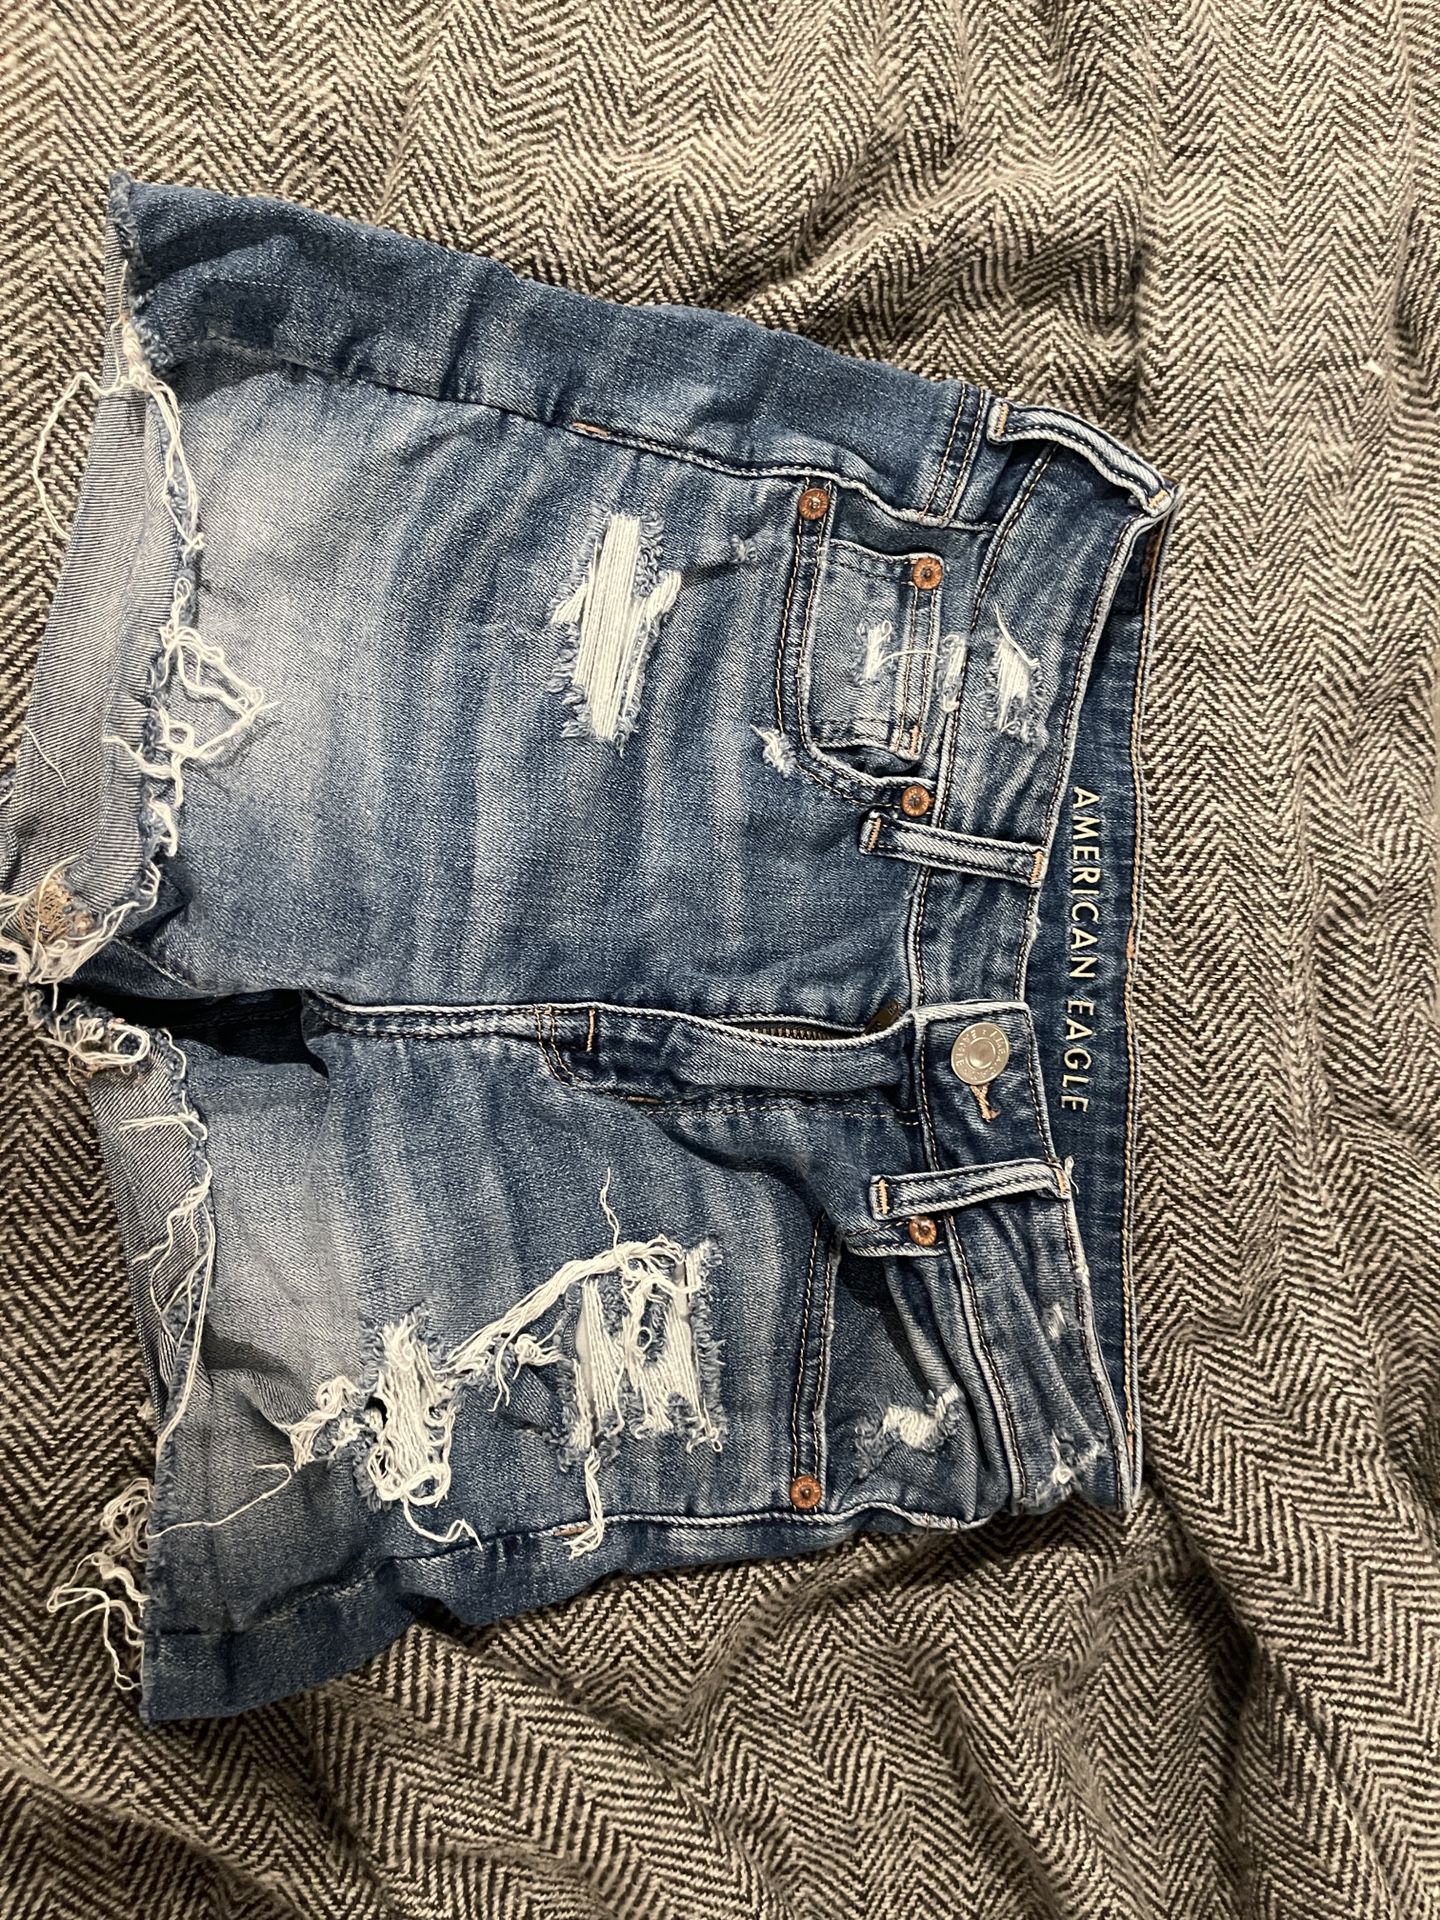 American Eagle Distressed Shorts For Women